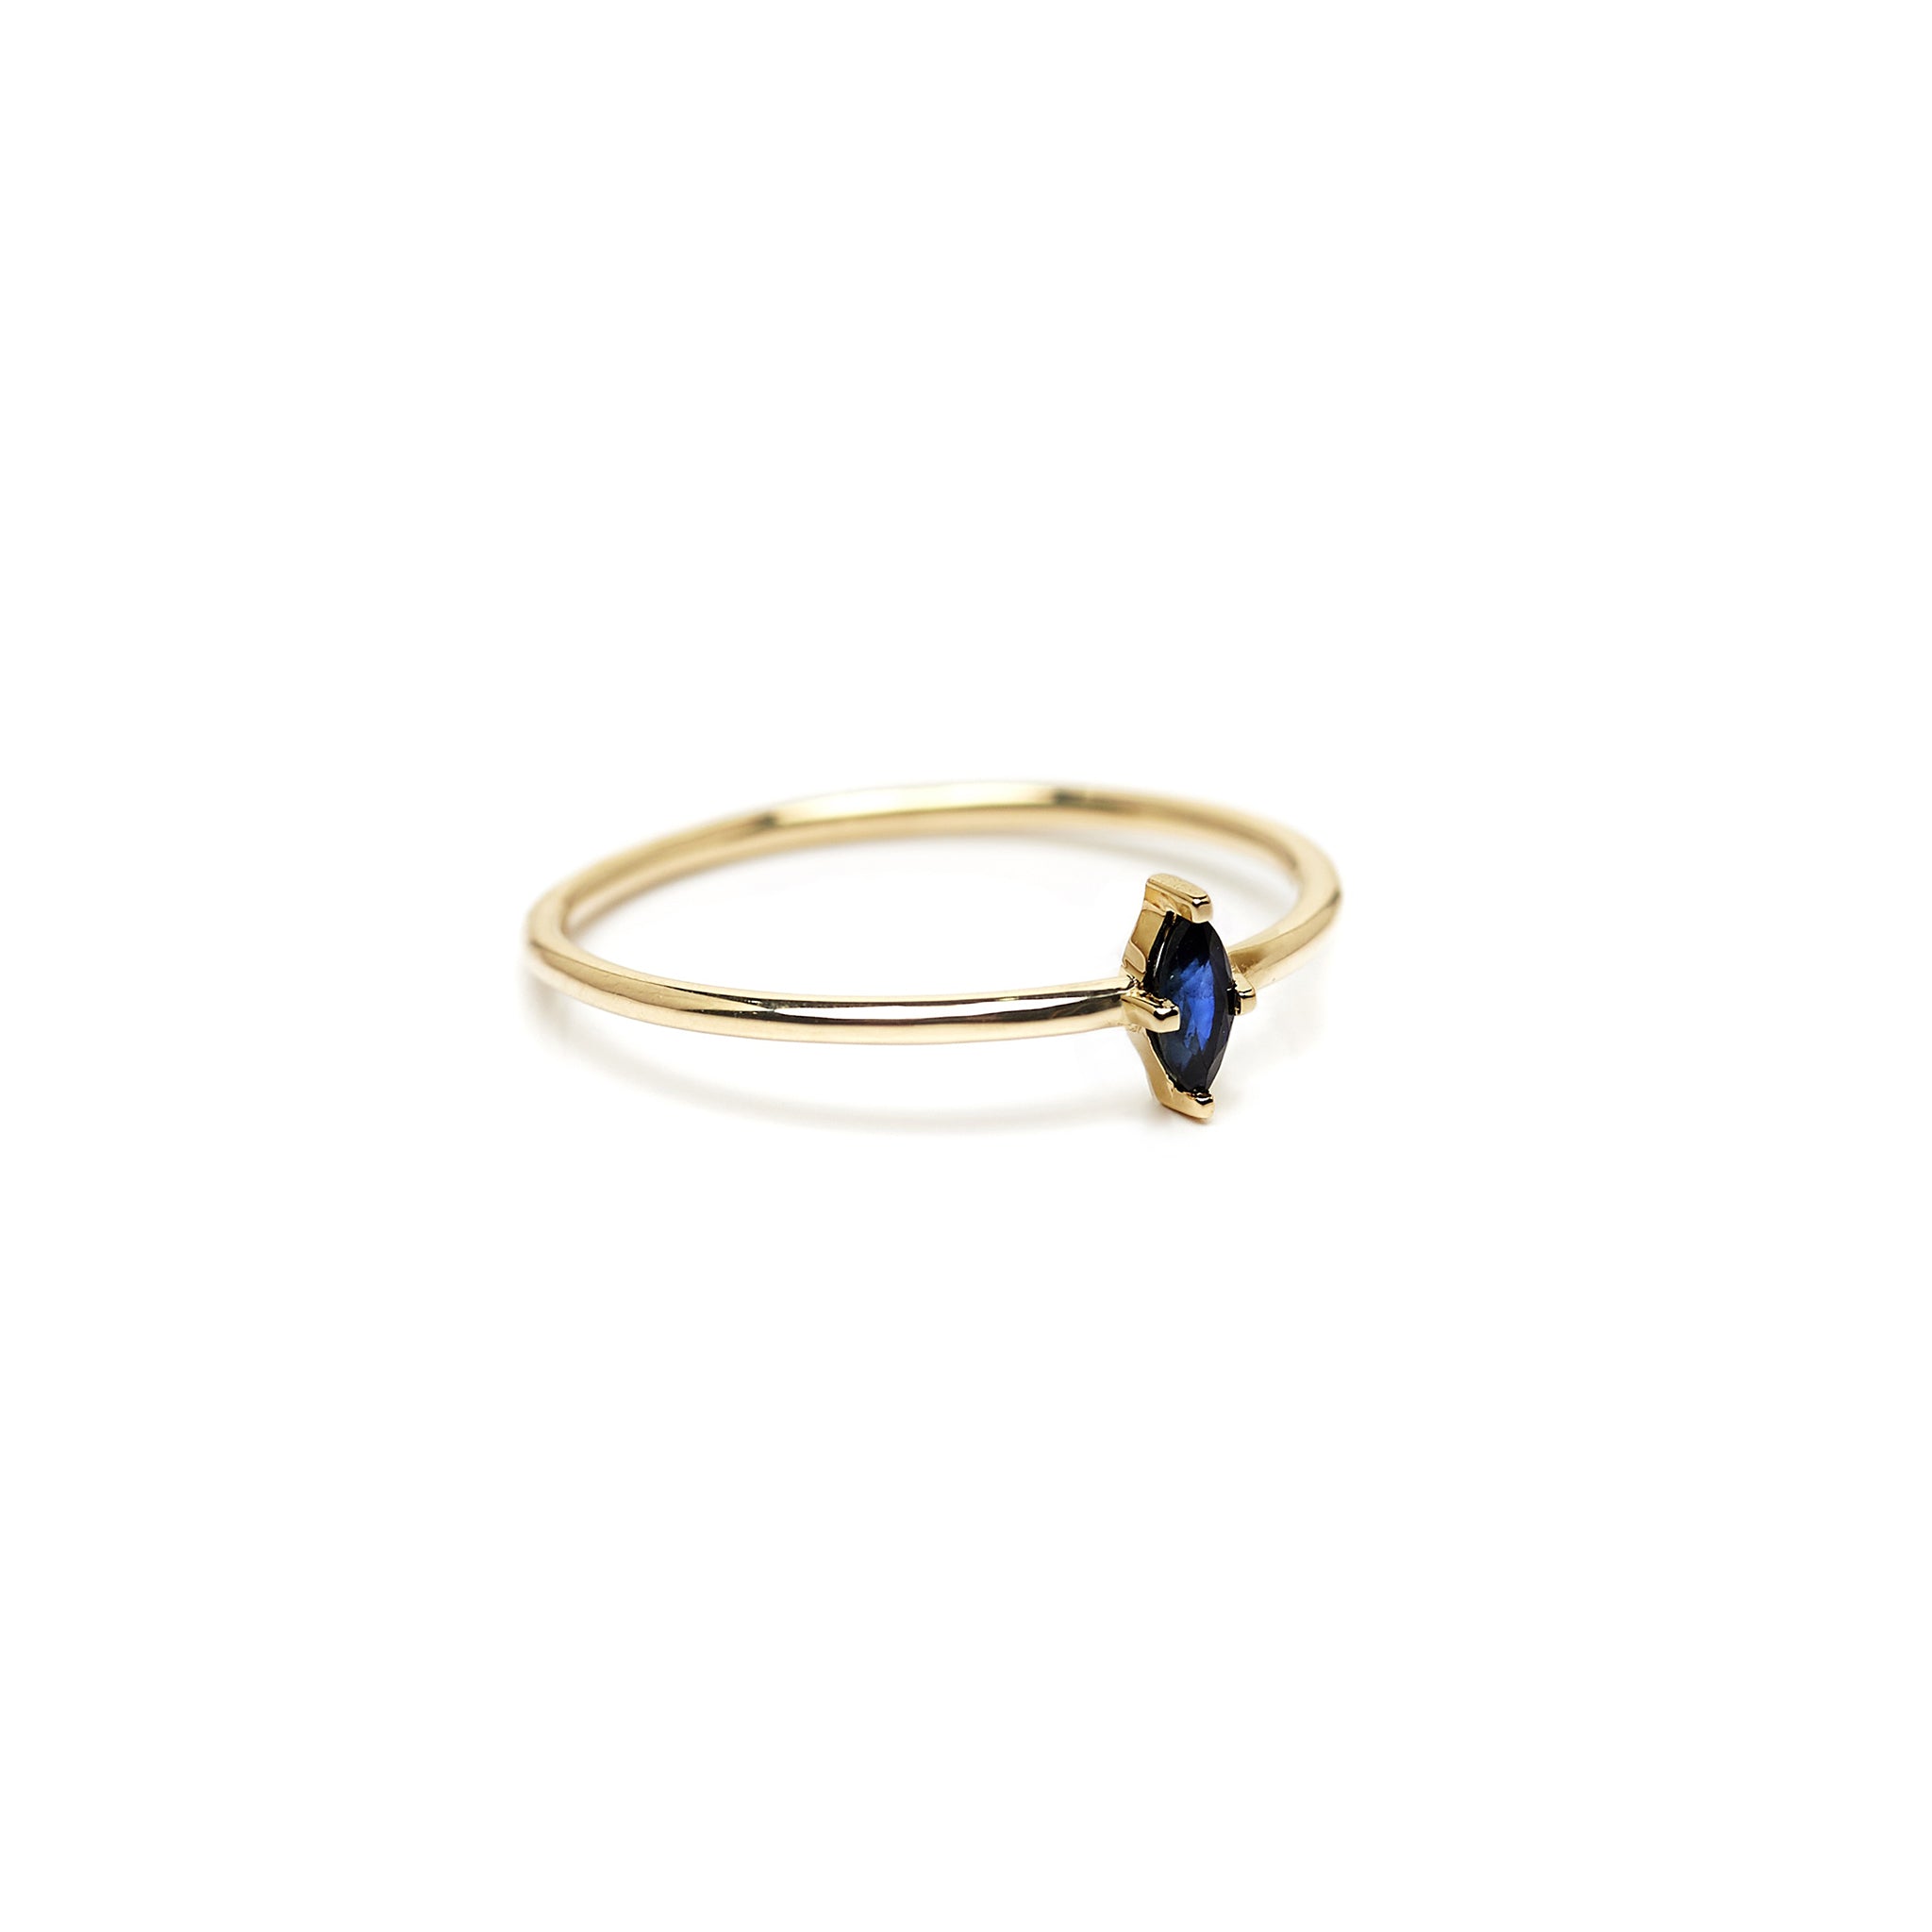 Twilight Ring - sapphire ring in 14k solid gold